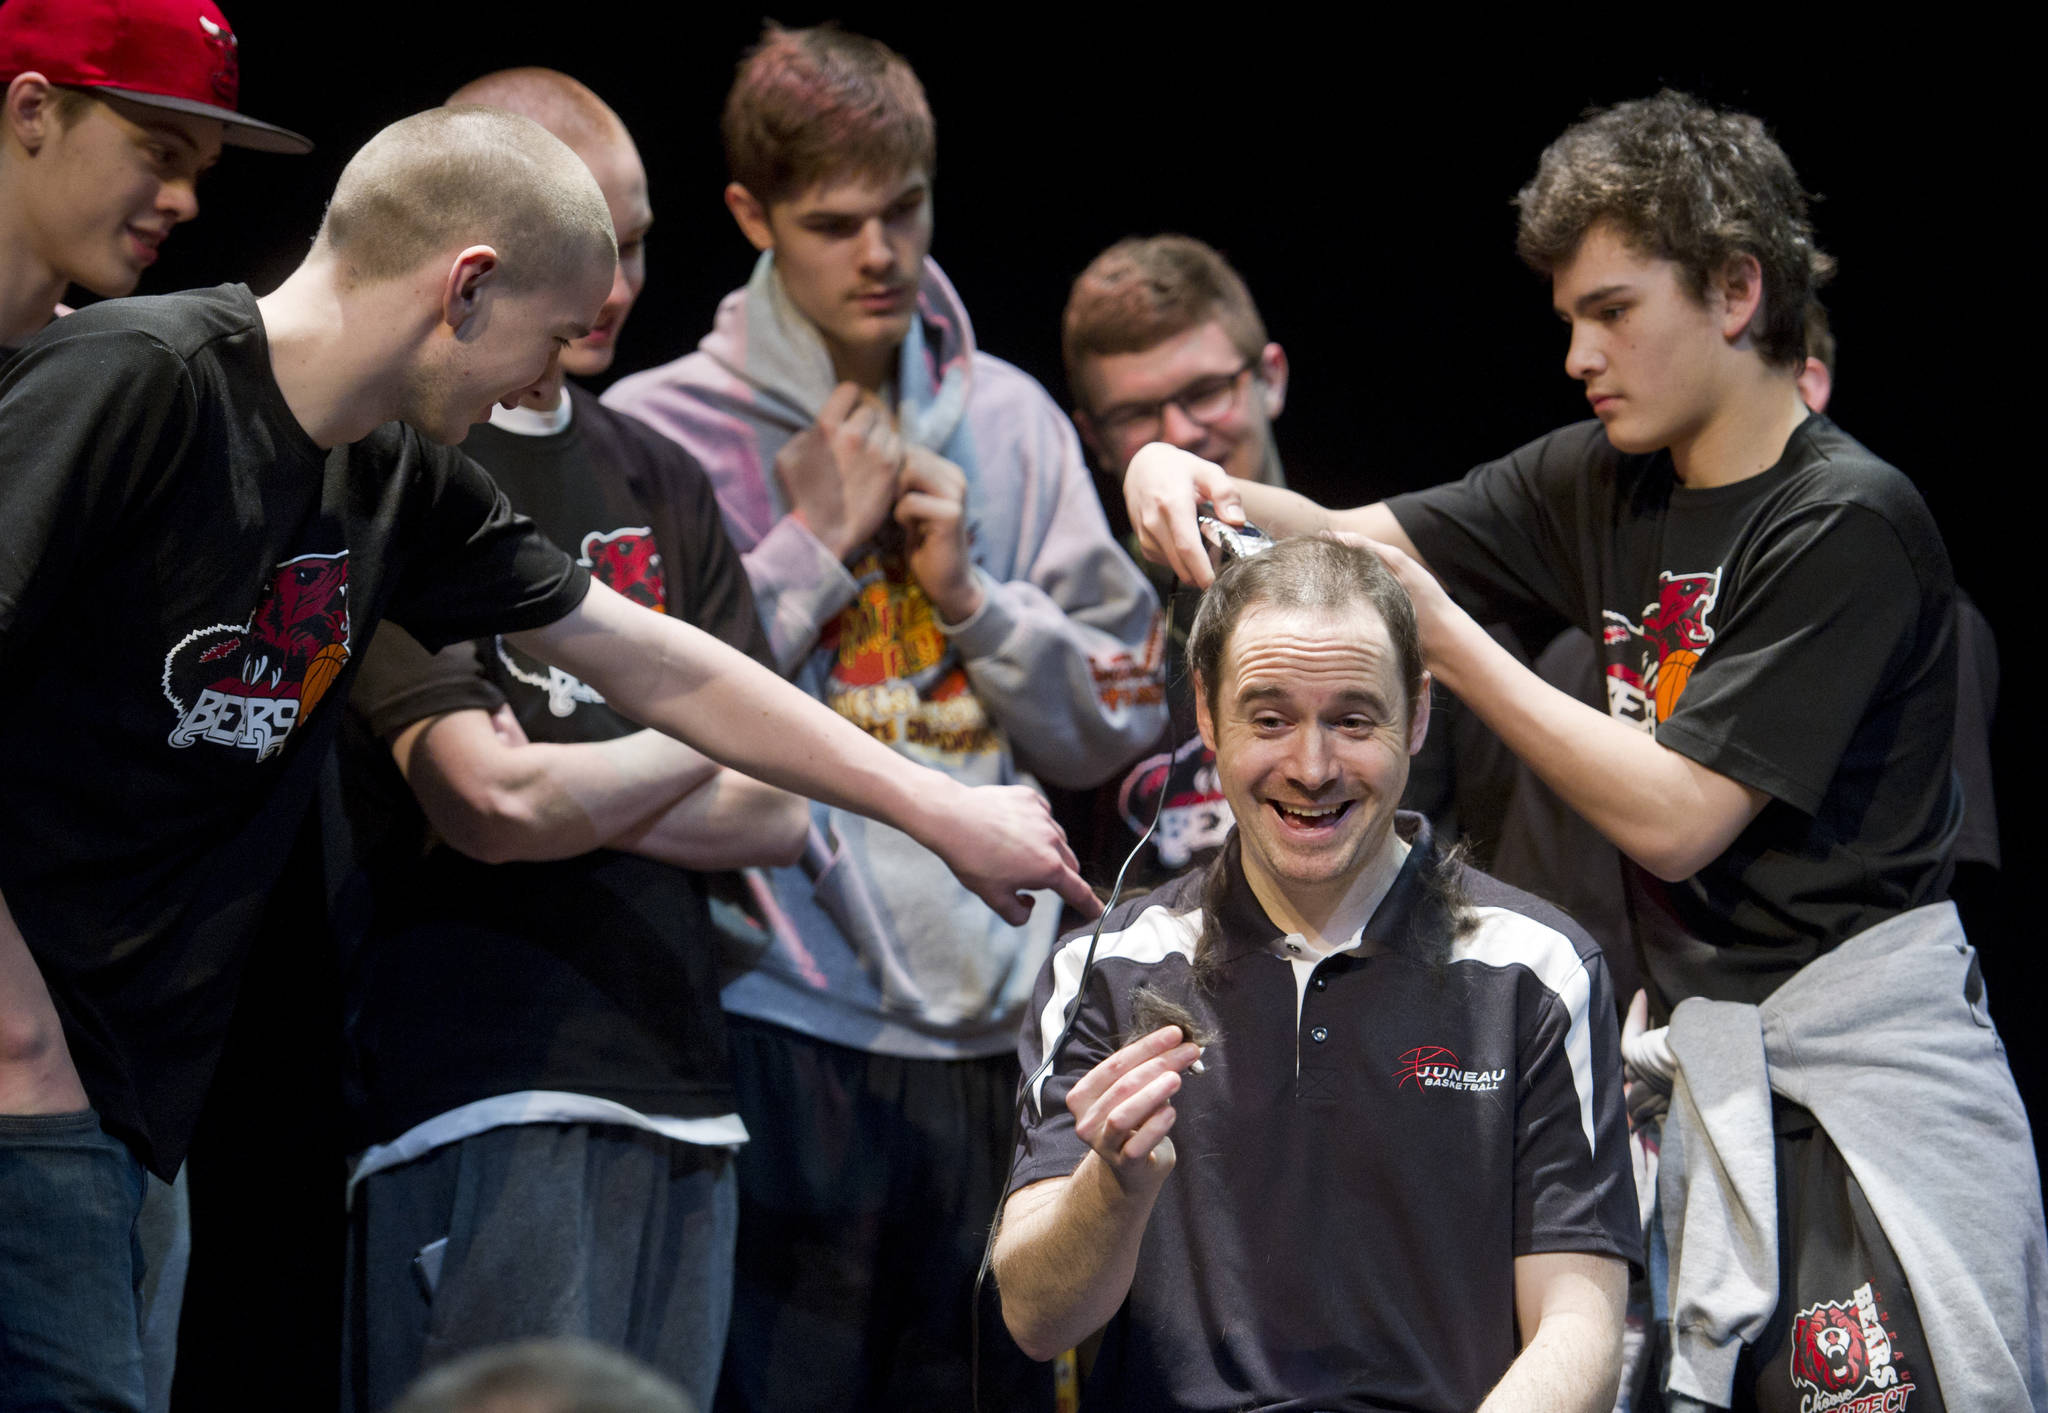 Michael Penn / Juneau Empire File
Juneau-Douglas High School head basketball coach Robert Casperson gets his hair cut on stage by senior Treyson Ramos during a school assembly`, holding up his end of the bargain that he would shave his head if his team won the state championship title. Casperson said he trusted the 2016 team’s senior class a lot.